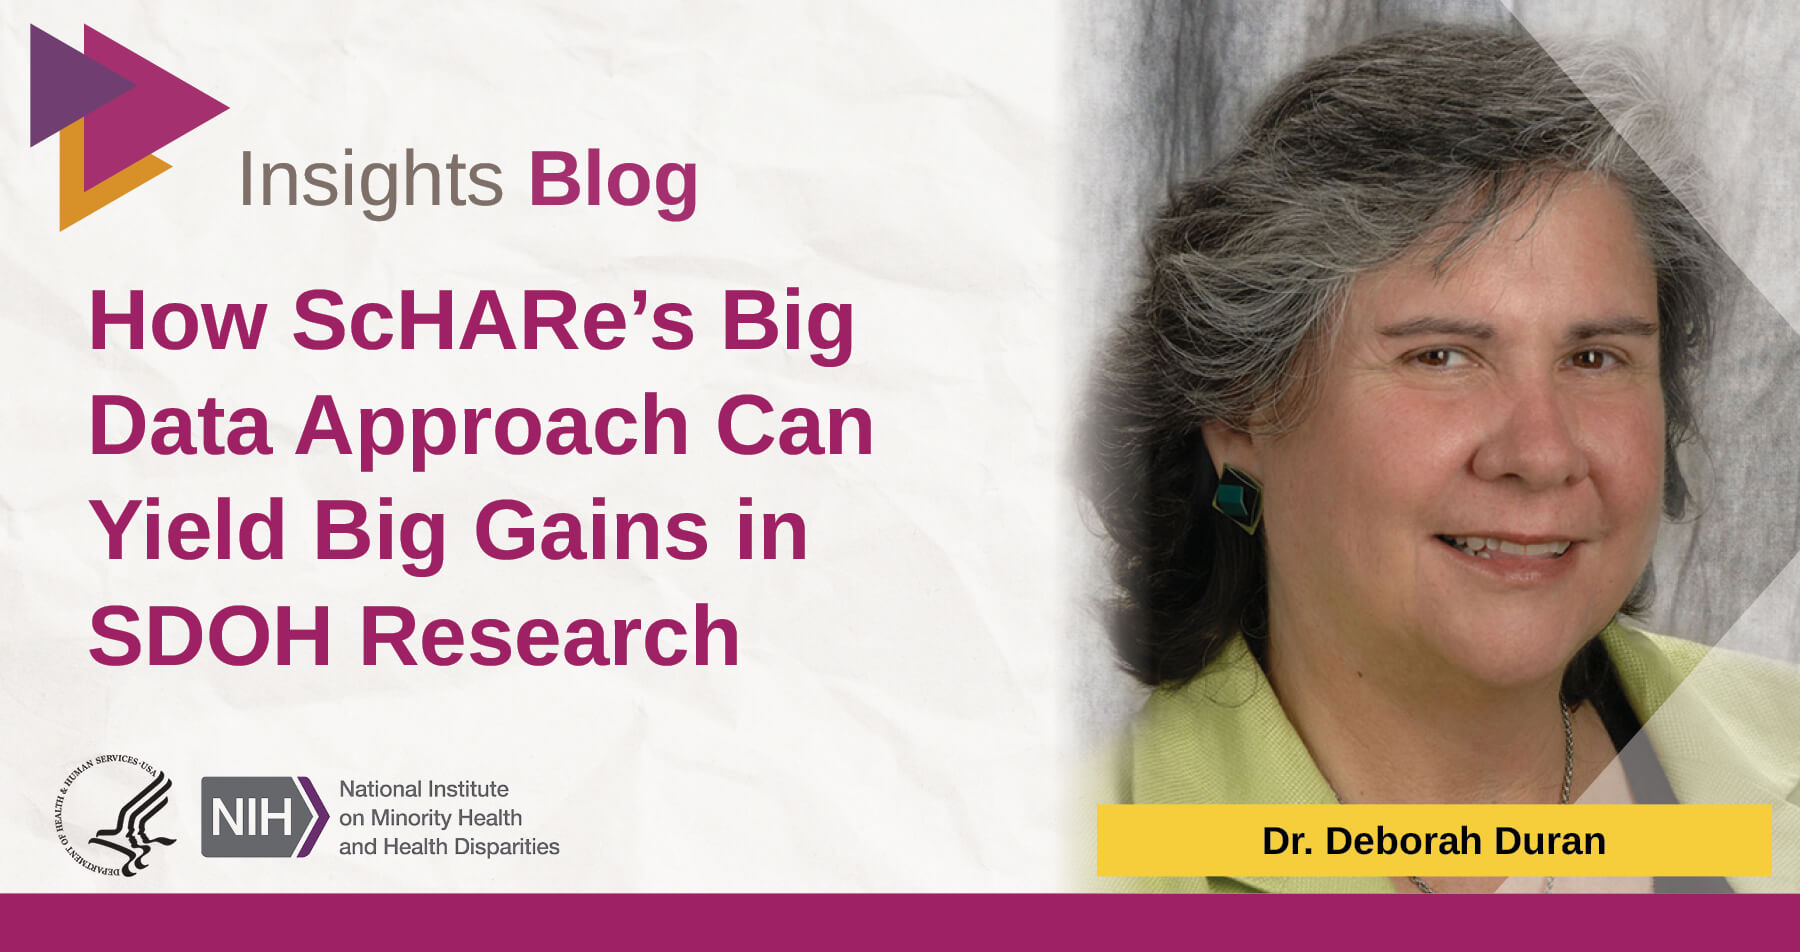 NIMHD Insights Blog: How ScHARe's Big Data Approach Can Yield Big Gains in SDOH Research. Image of post author Dr. Deborah Duran and NIMHD logo